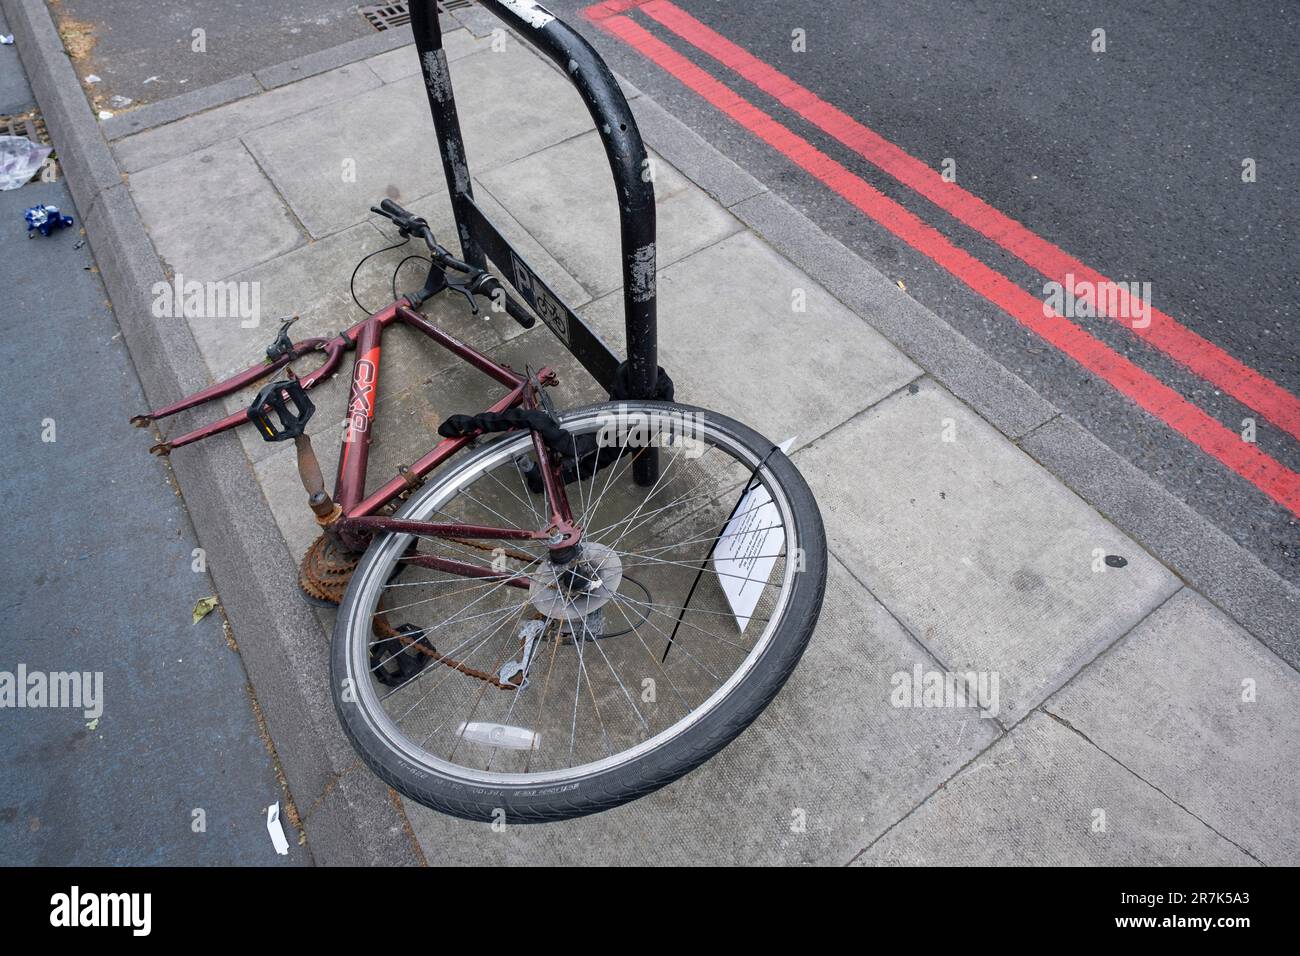 Bicycle which has been locked to bike stand for a long time and causing an obstruction, receive a TfL bike removal notice that they will be removed following a given period on 25th May 2023 in London, United Kingdom. Stock Photo